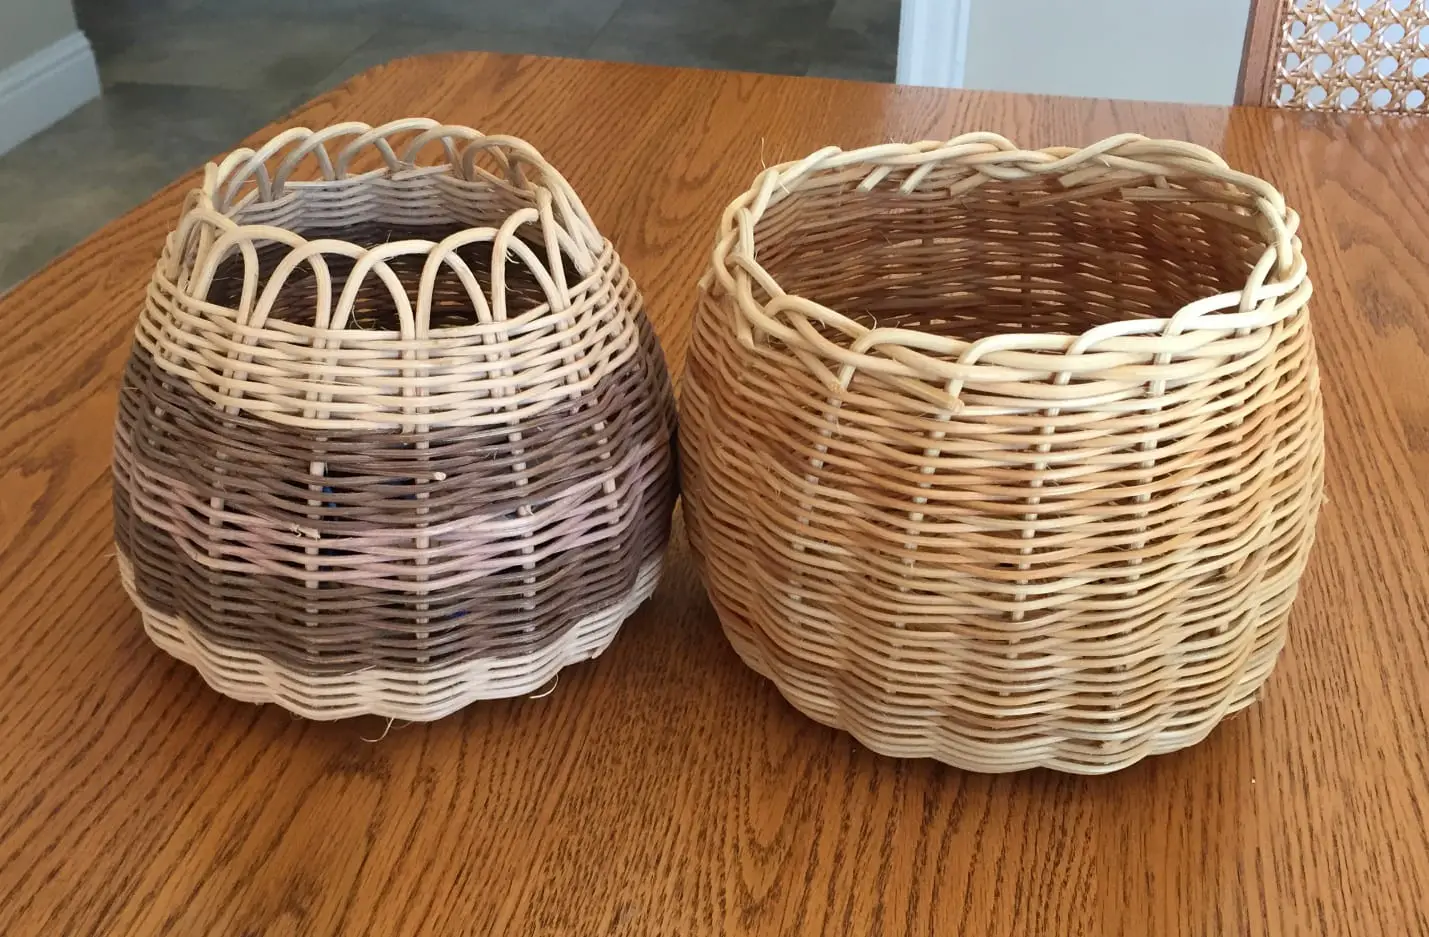 How To Make Reed Baskets